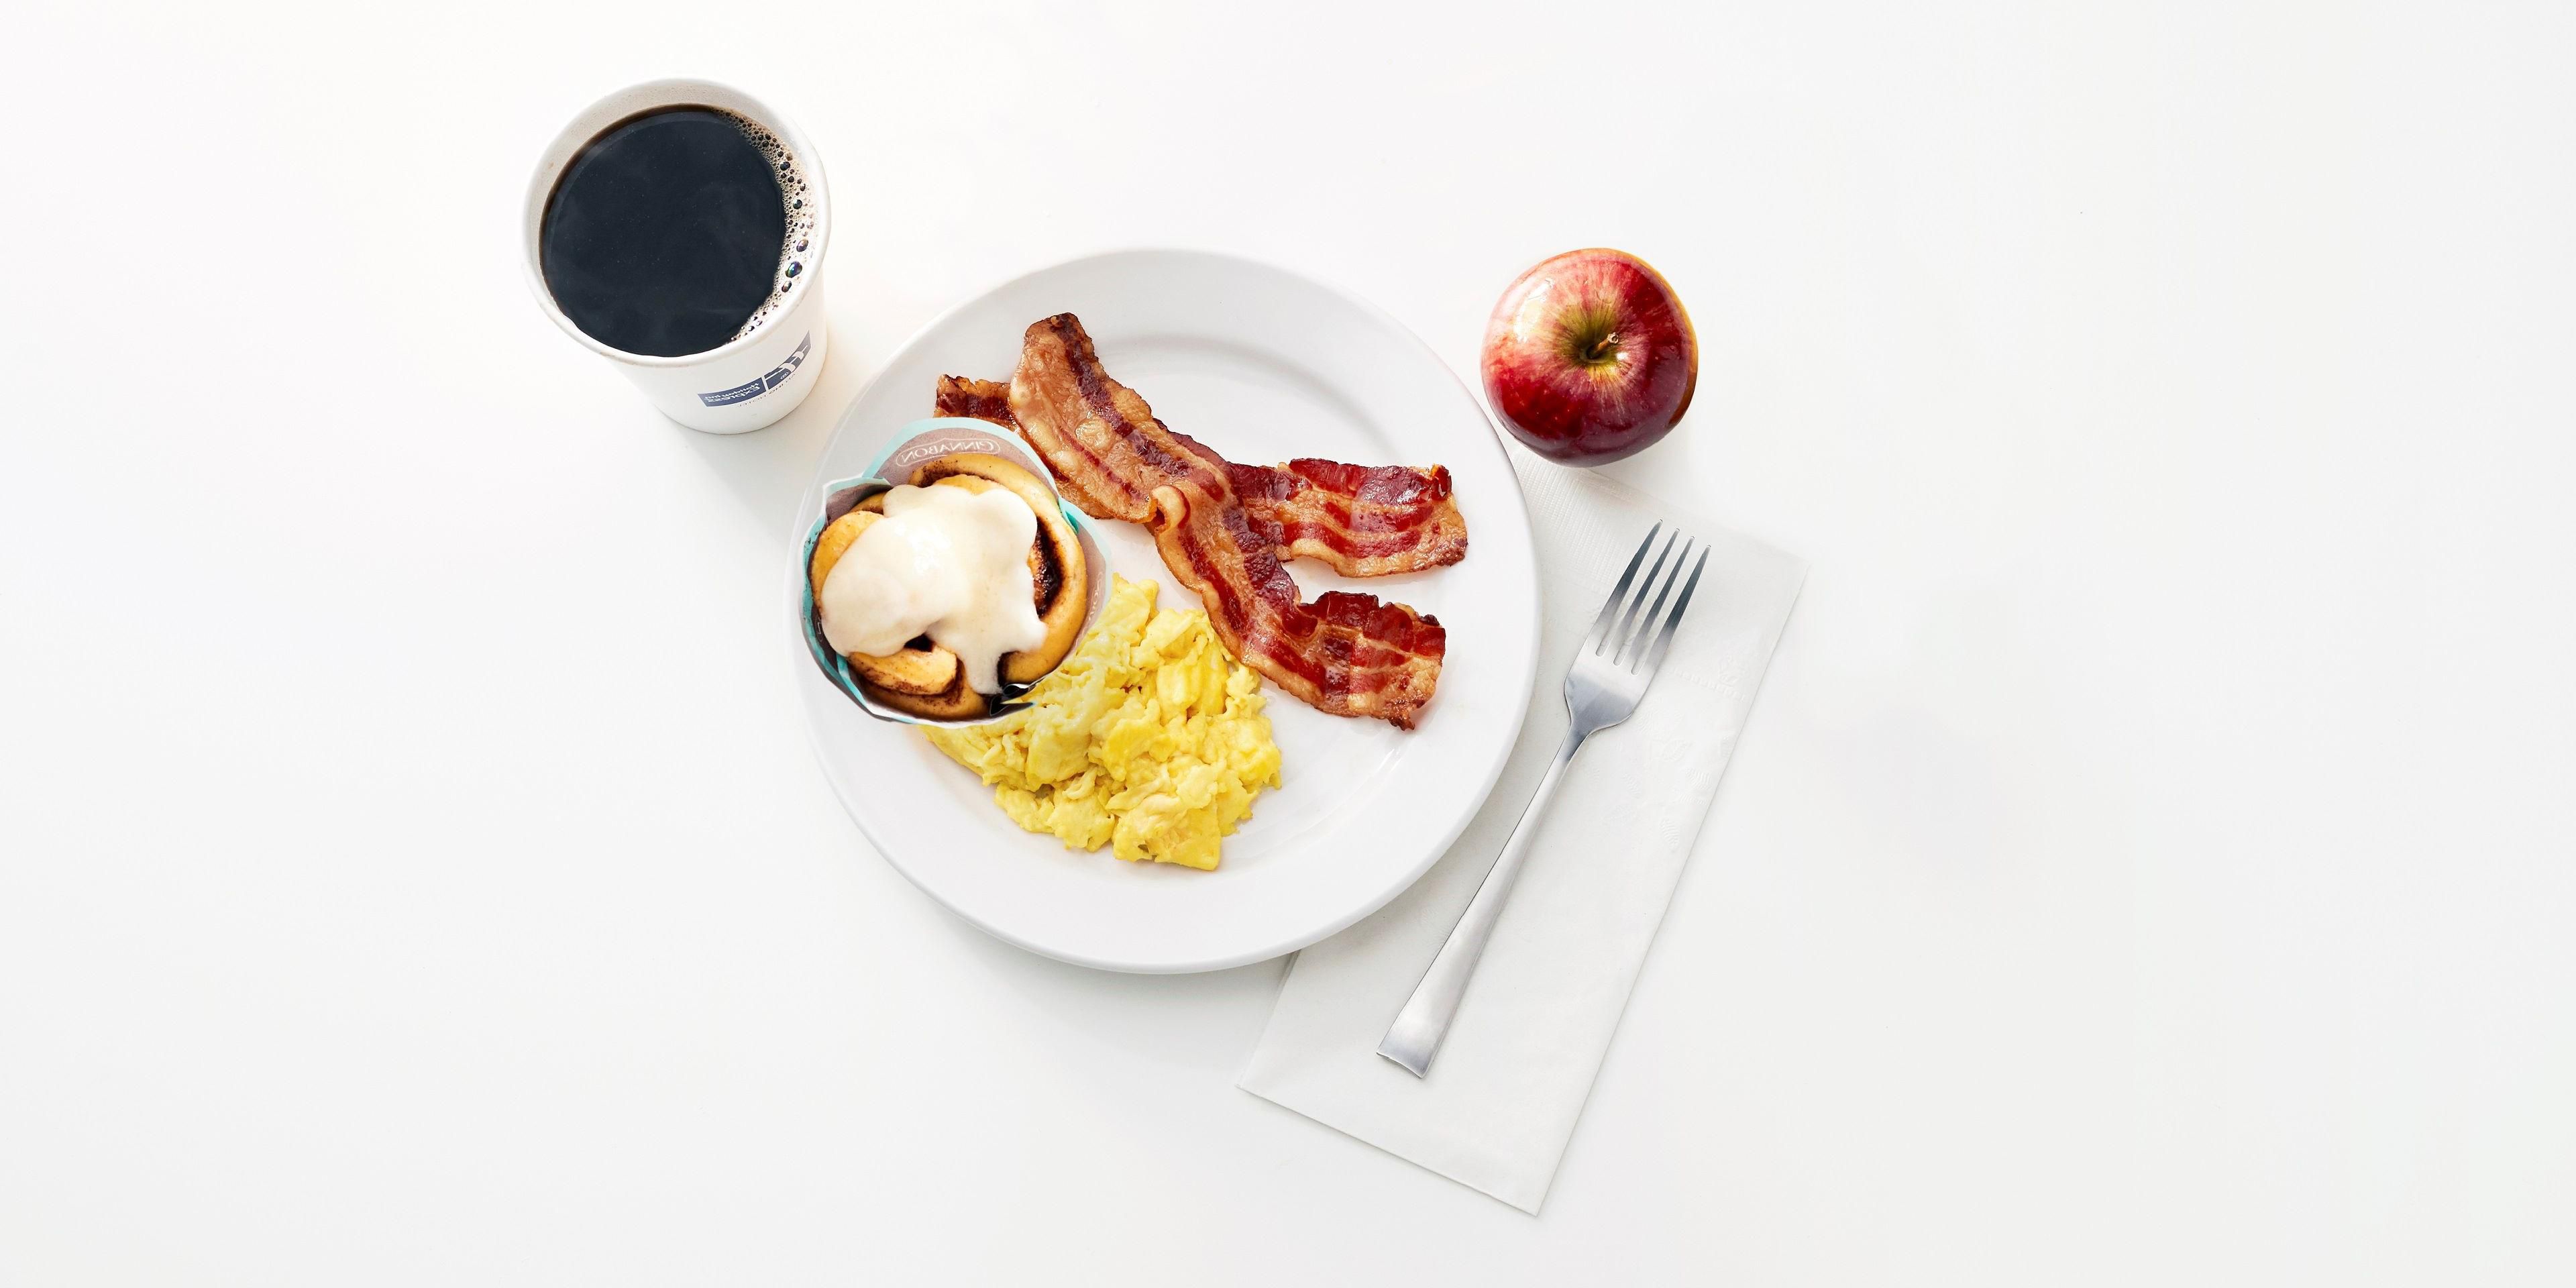 Kick start your day with our free Express Start Breakfast, with grab ‘n’ go options and favorites such as eggs and bacon, hot pancakes, our signature cinnamon rolls and fresh coffee. Offered from 6:30 - 9:30 AM.